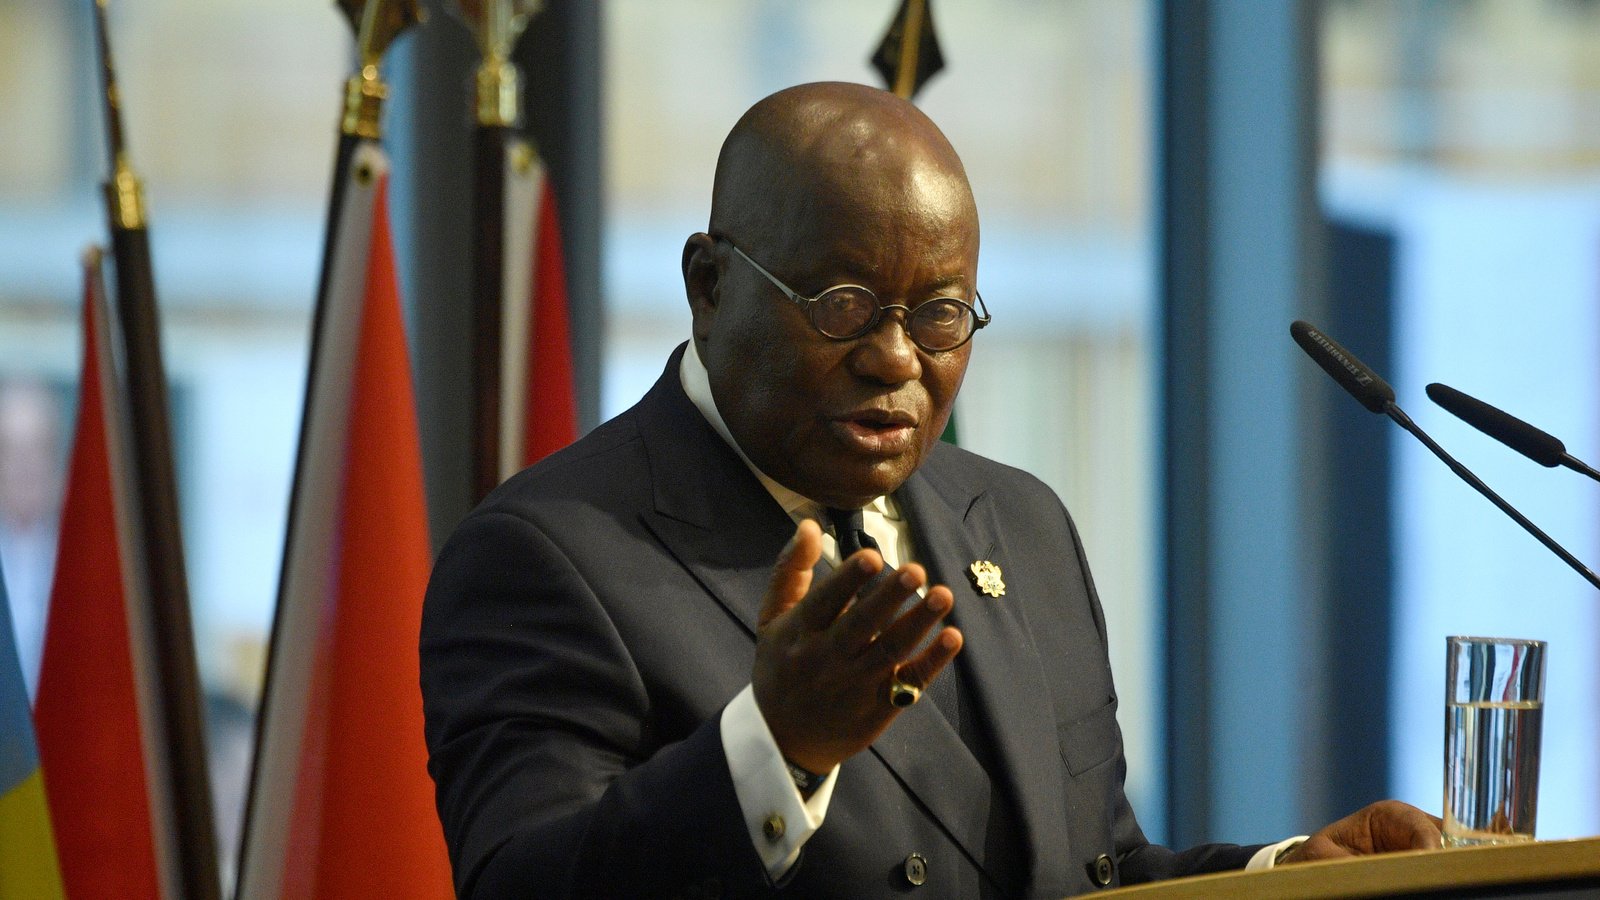 President Akufo-Addo's first comment on IMF, 'With hard work, unity Ghana will succeed'